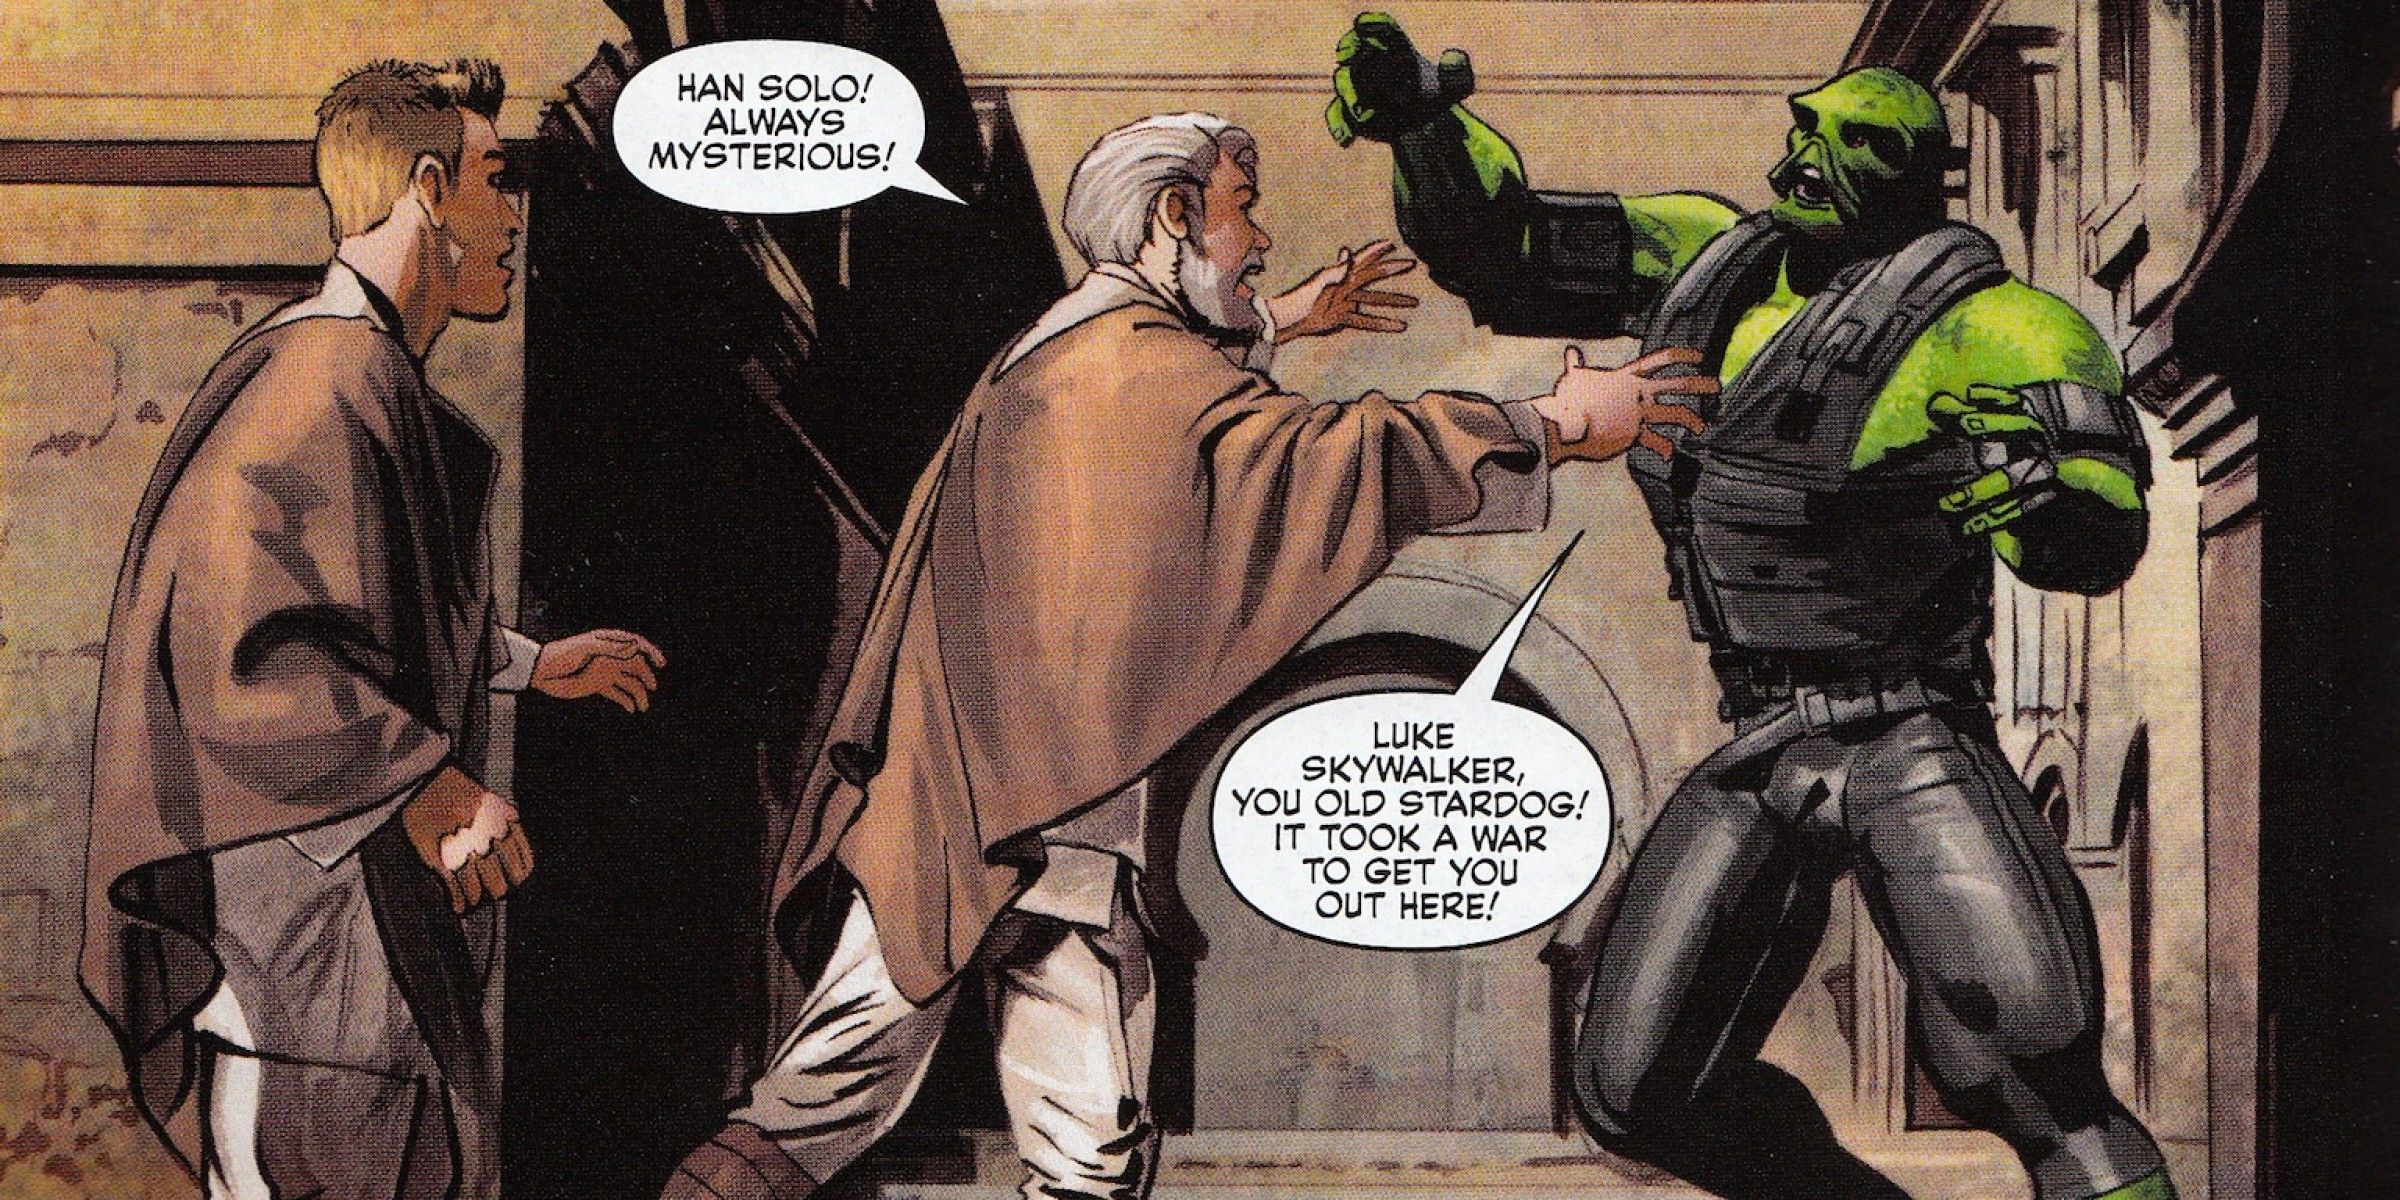 Star Wars comic book featuring Han Solo as a green-skinned alien with gills